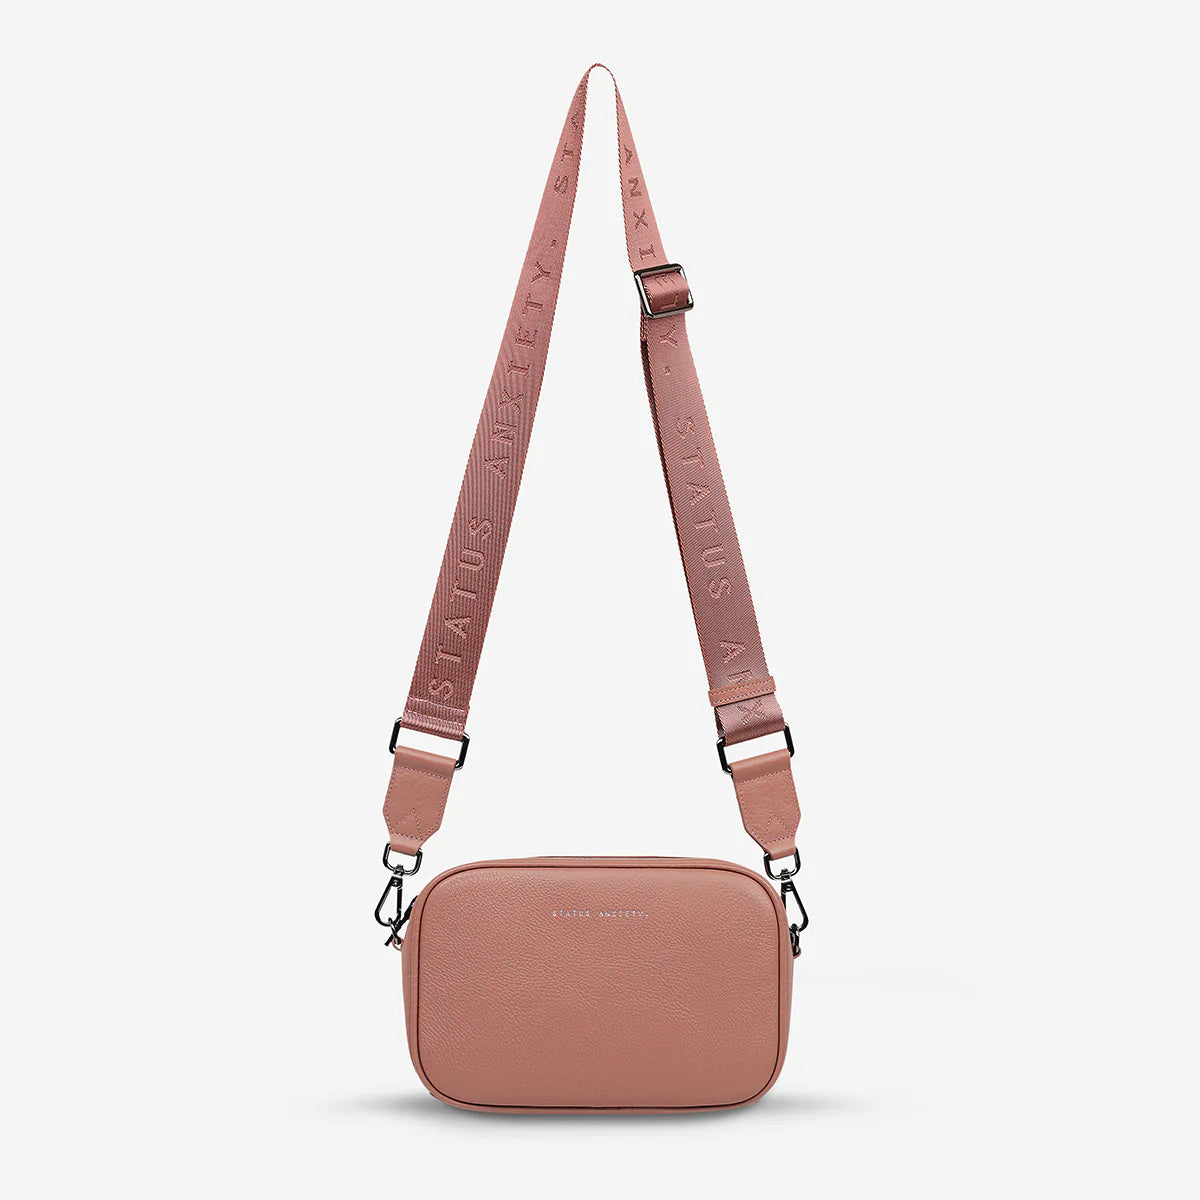 Status Anxiety Bag - Plunder - Dusty Rose with Webbed Strap